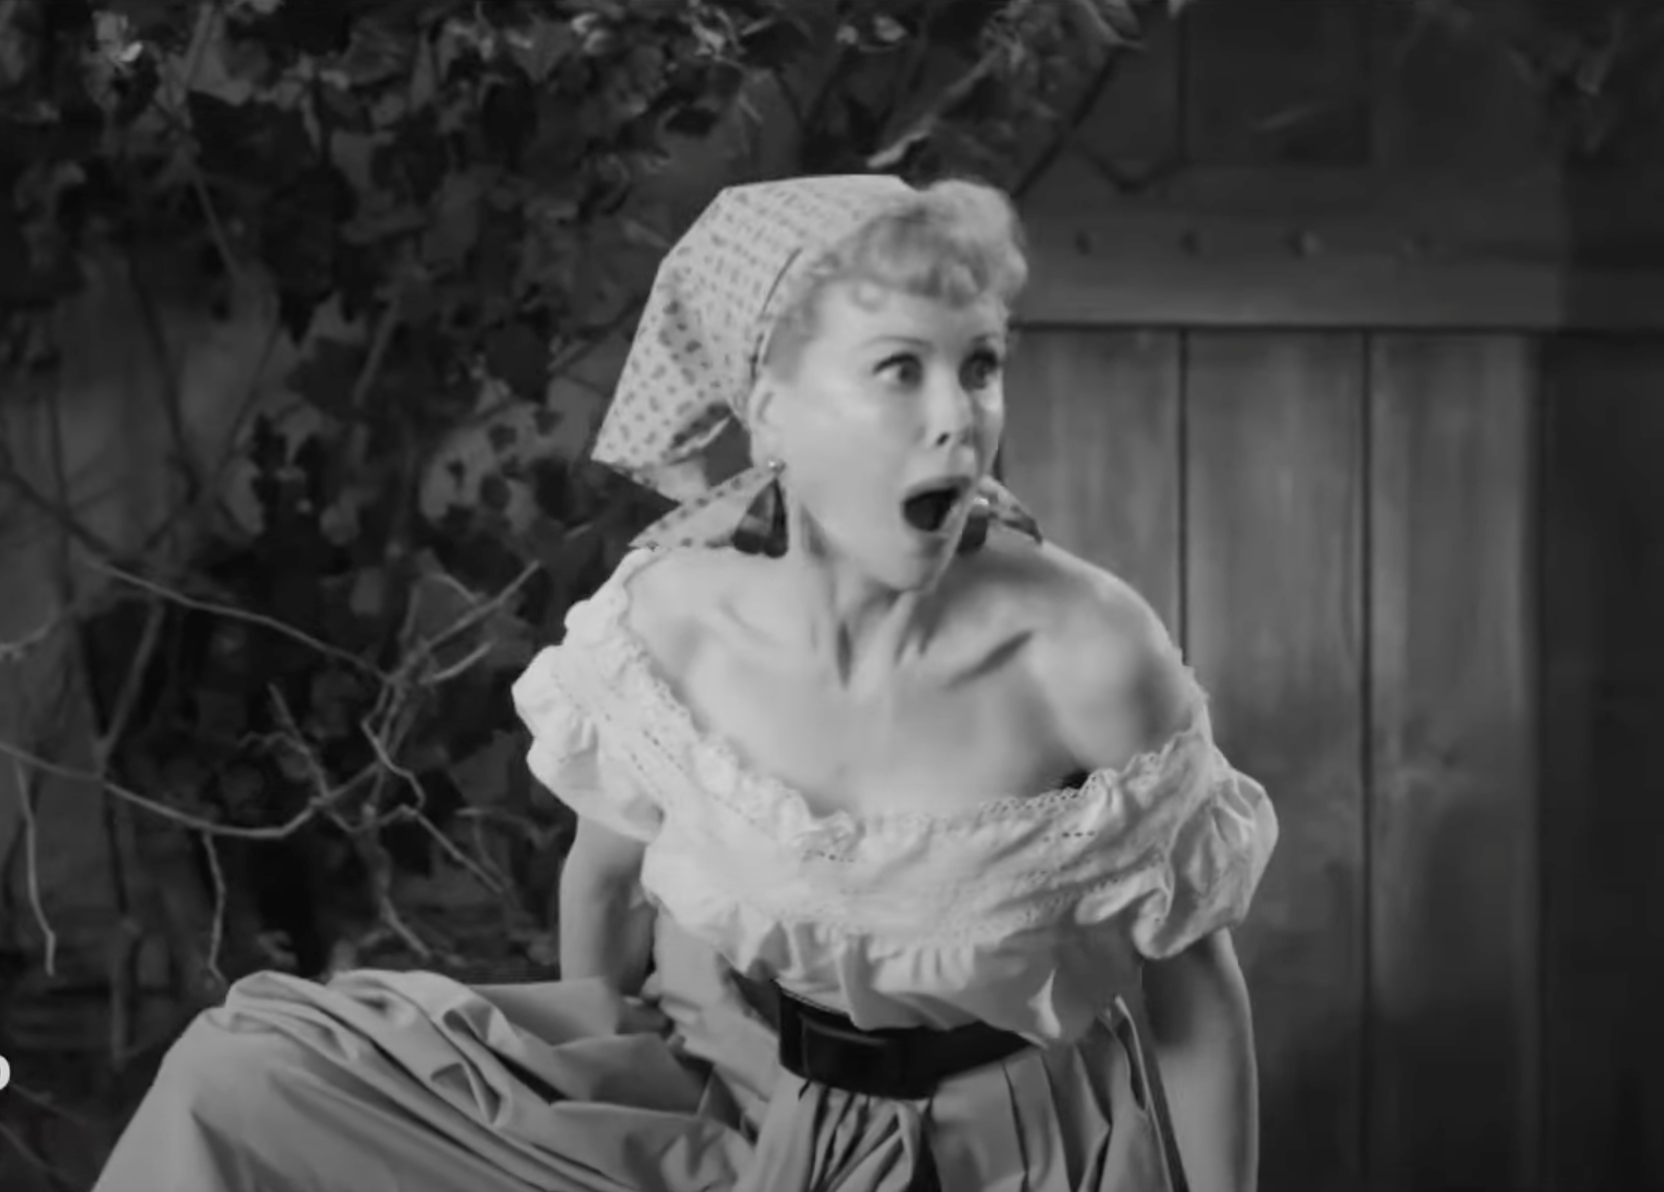 Nicole Kidman proves naysayers wrong by transforming into Lucille Ball in Being The Ricardos teaser